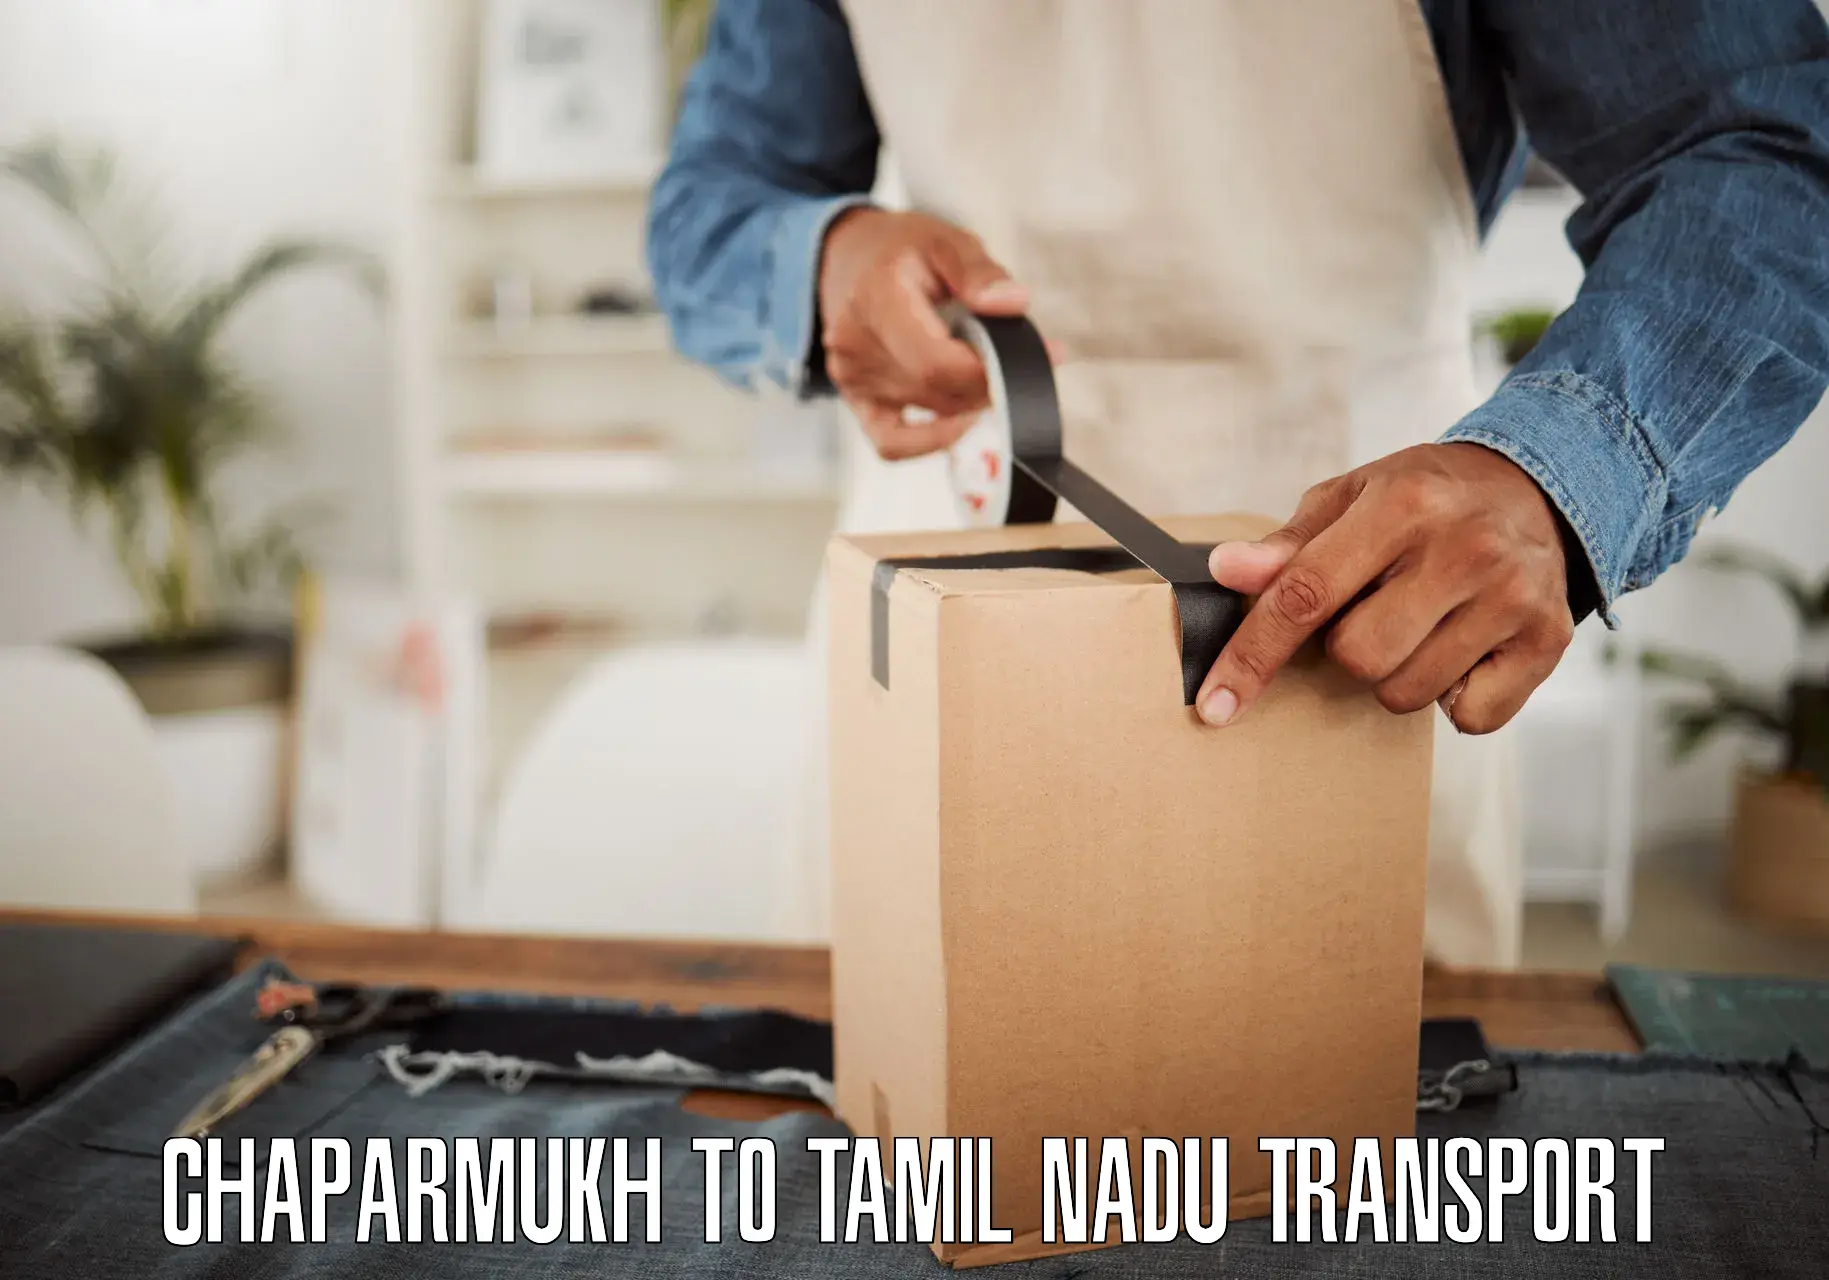 Commercial transport service in Chaparmukh to Thiruvadanai